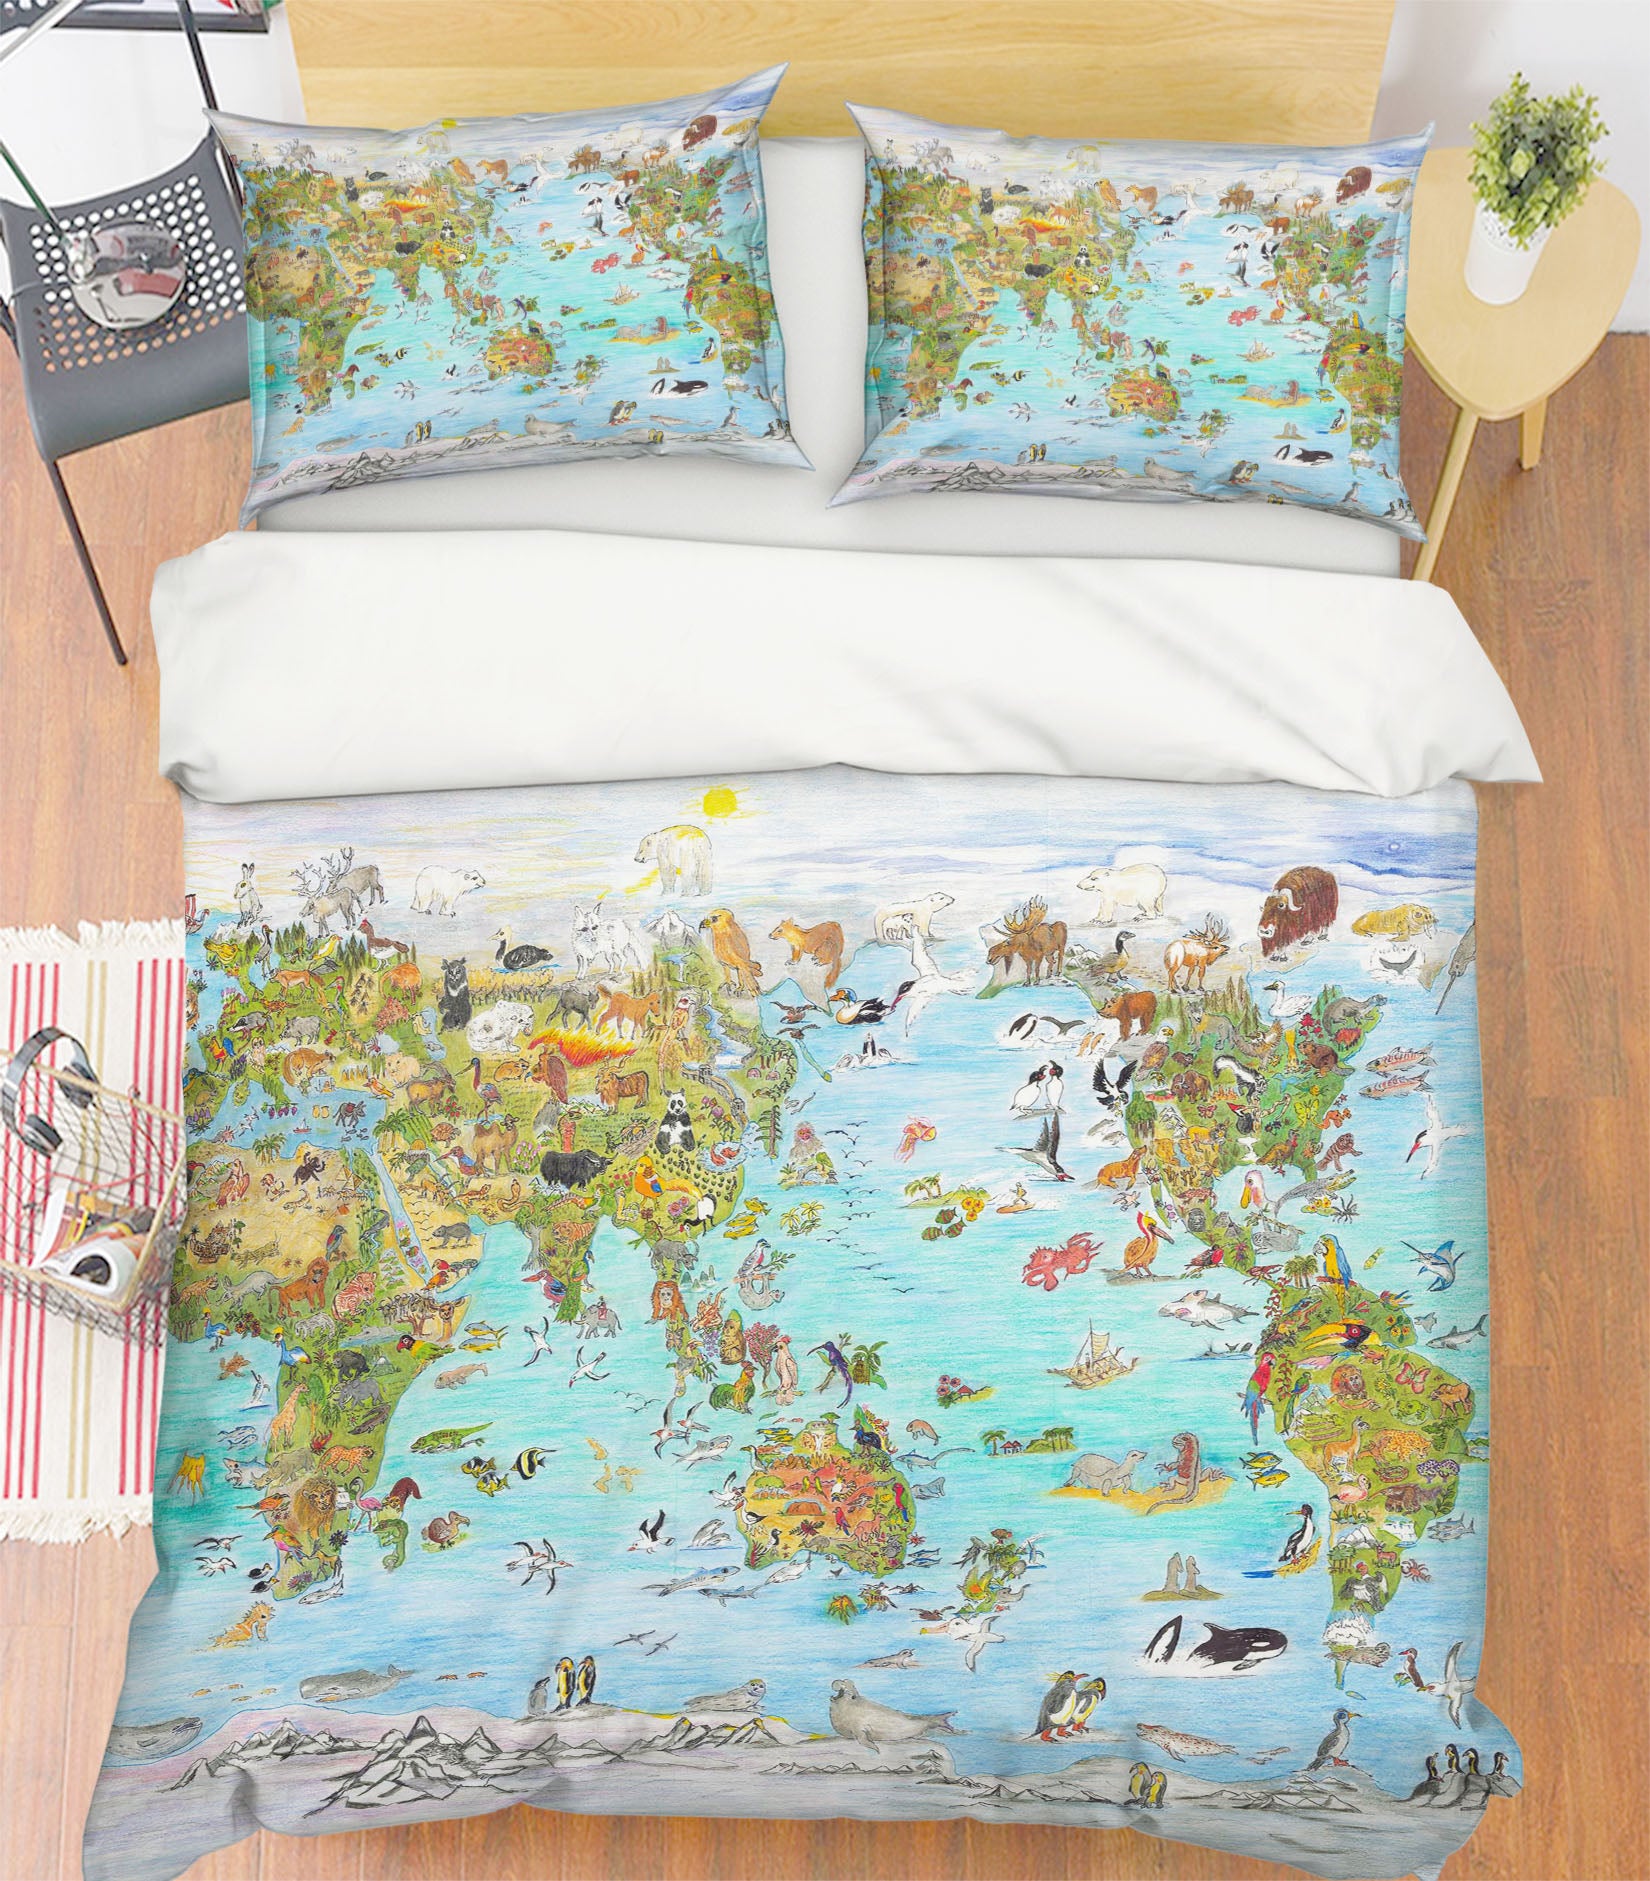 3D Animal Atlas 039 Michael Sewell Bedding Bed Pillowcases Quilt